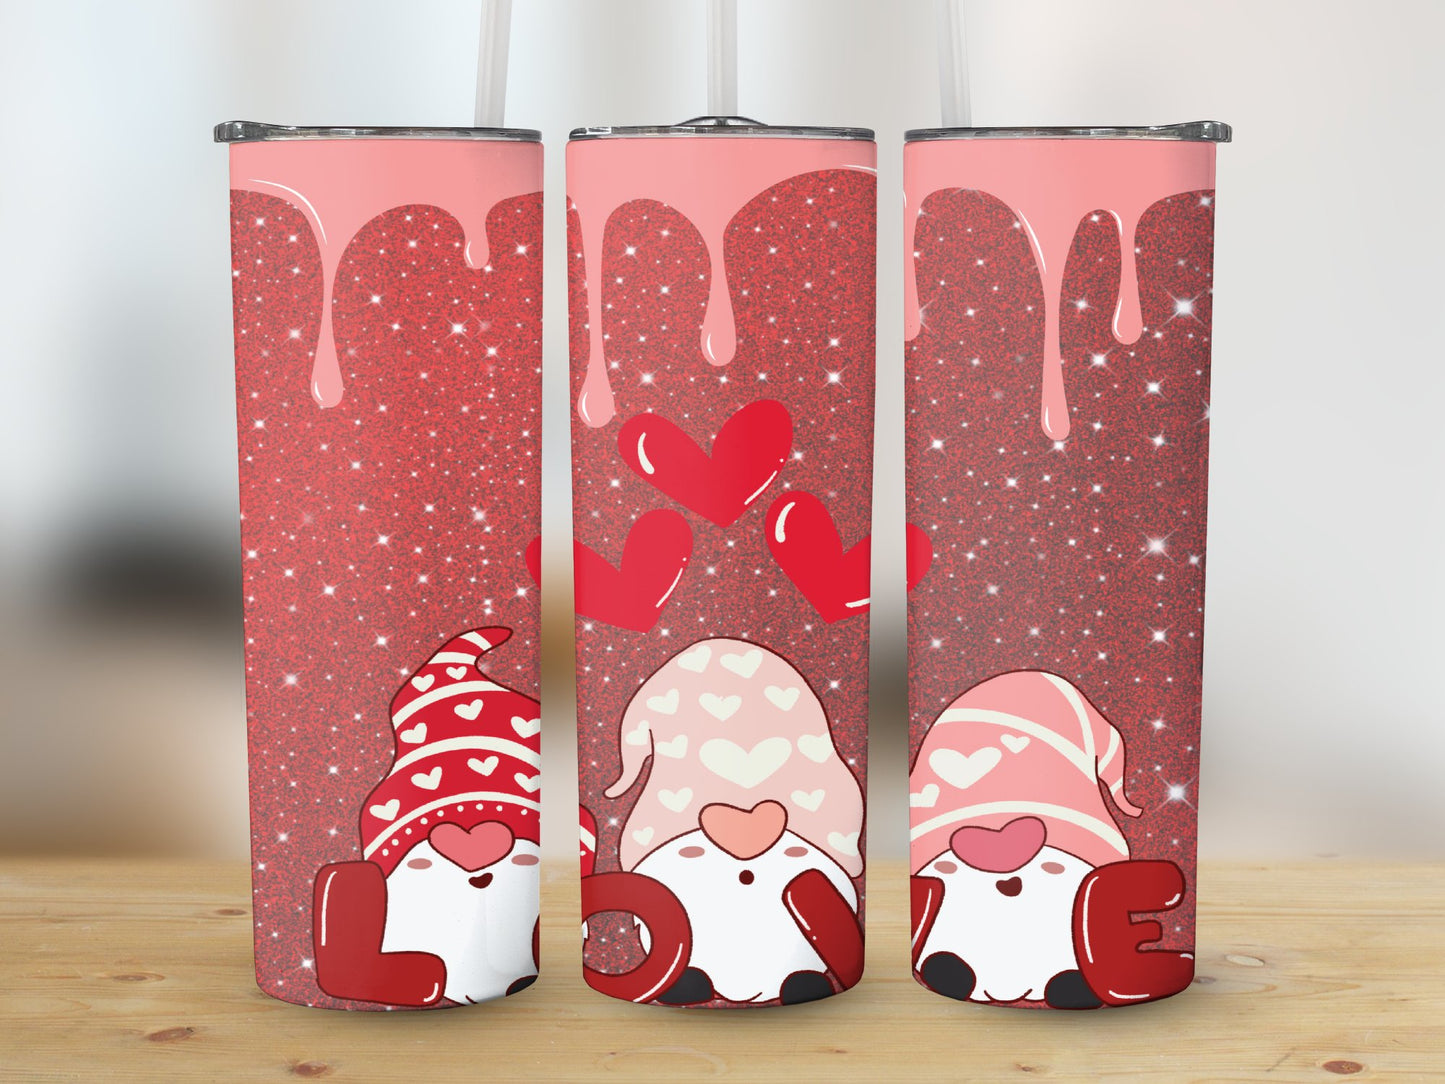 Love is In the Air (Valentine Tumbler)